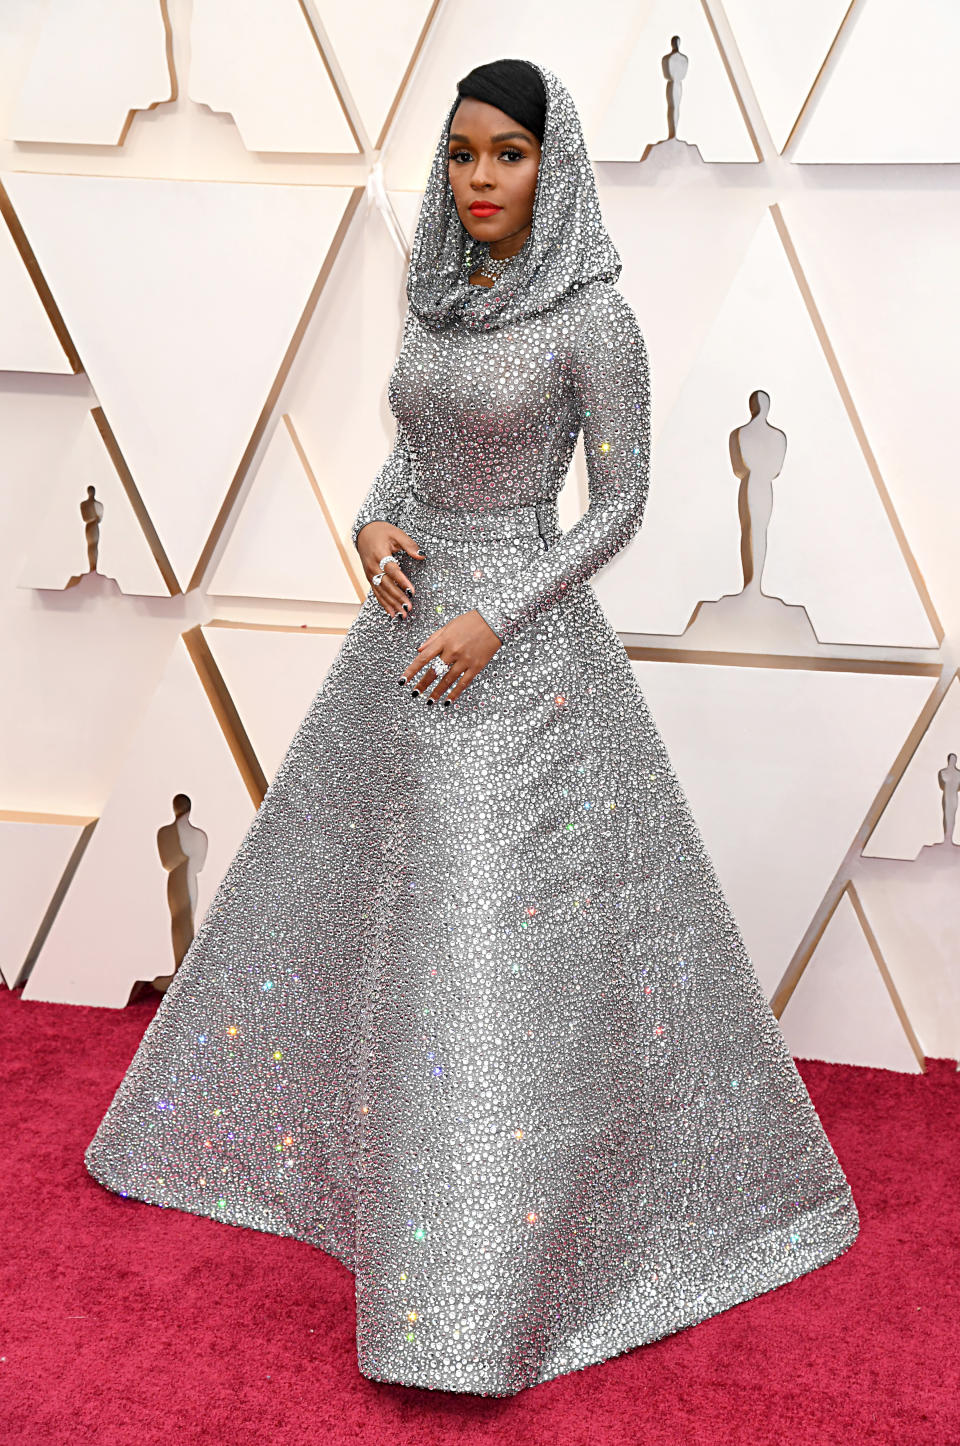 HOLLYWOOD, CALIFORNIA - FEBRUARY 09: Janelle Monáe attends the 92nd Annual Academy Awards at Hollywood and Highland on February 09, 2020 in Hollywood, California. (Photo by Jeff Kravitz/FilmMagic)